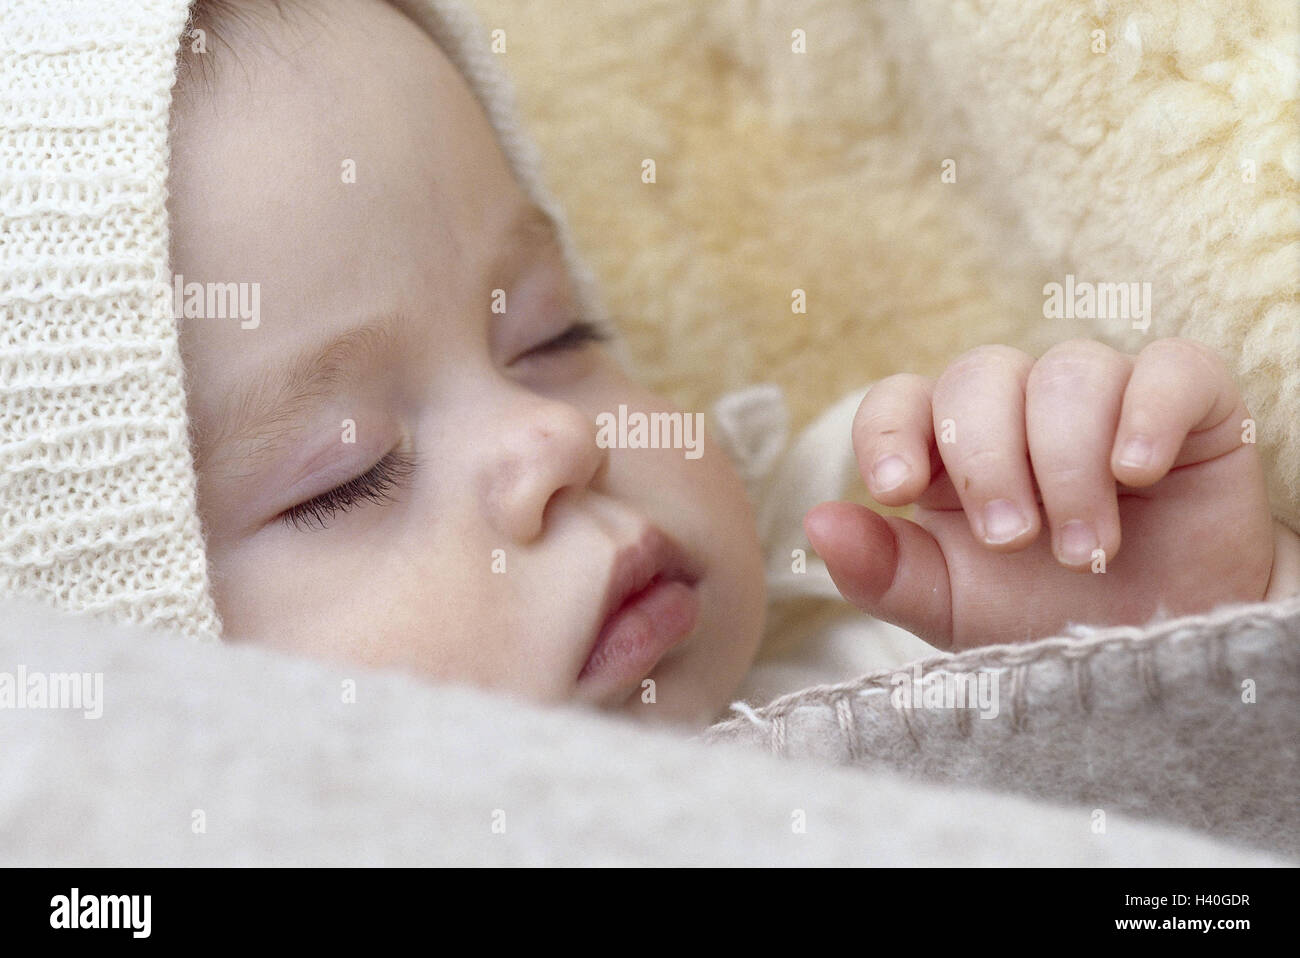 Baby, cord cap, sleep, sleep off detail, infant, child, infant, newborn child, tiredly, fatigue, sleep, childhood, rest, peacefully, quiescence, recover, rest, very close Stock Photo